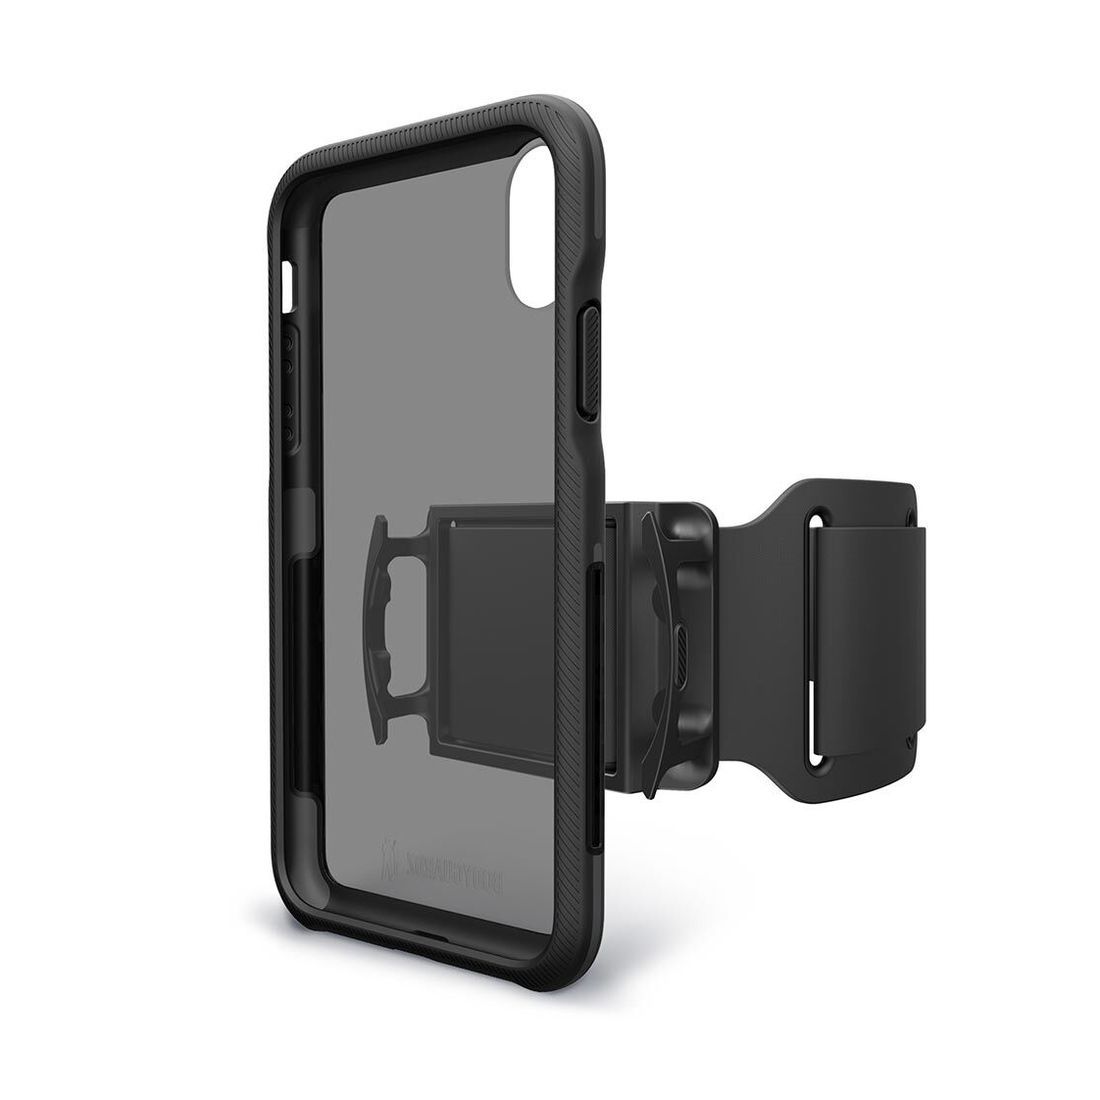 BodyGuardz Trainr Pro Case Black/Grey for iPhone XS Max with Armband